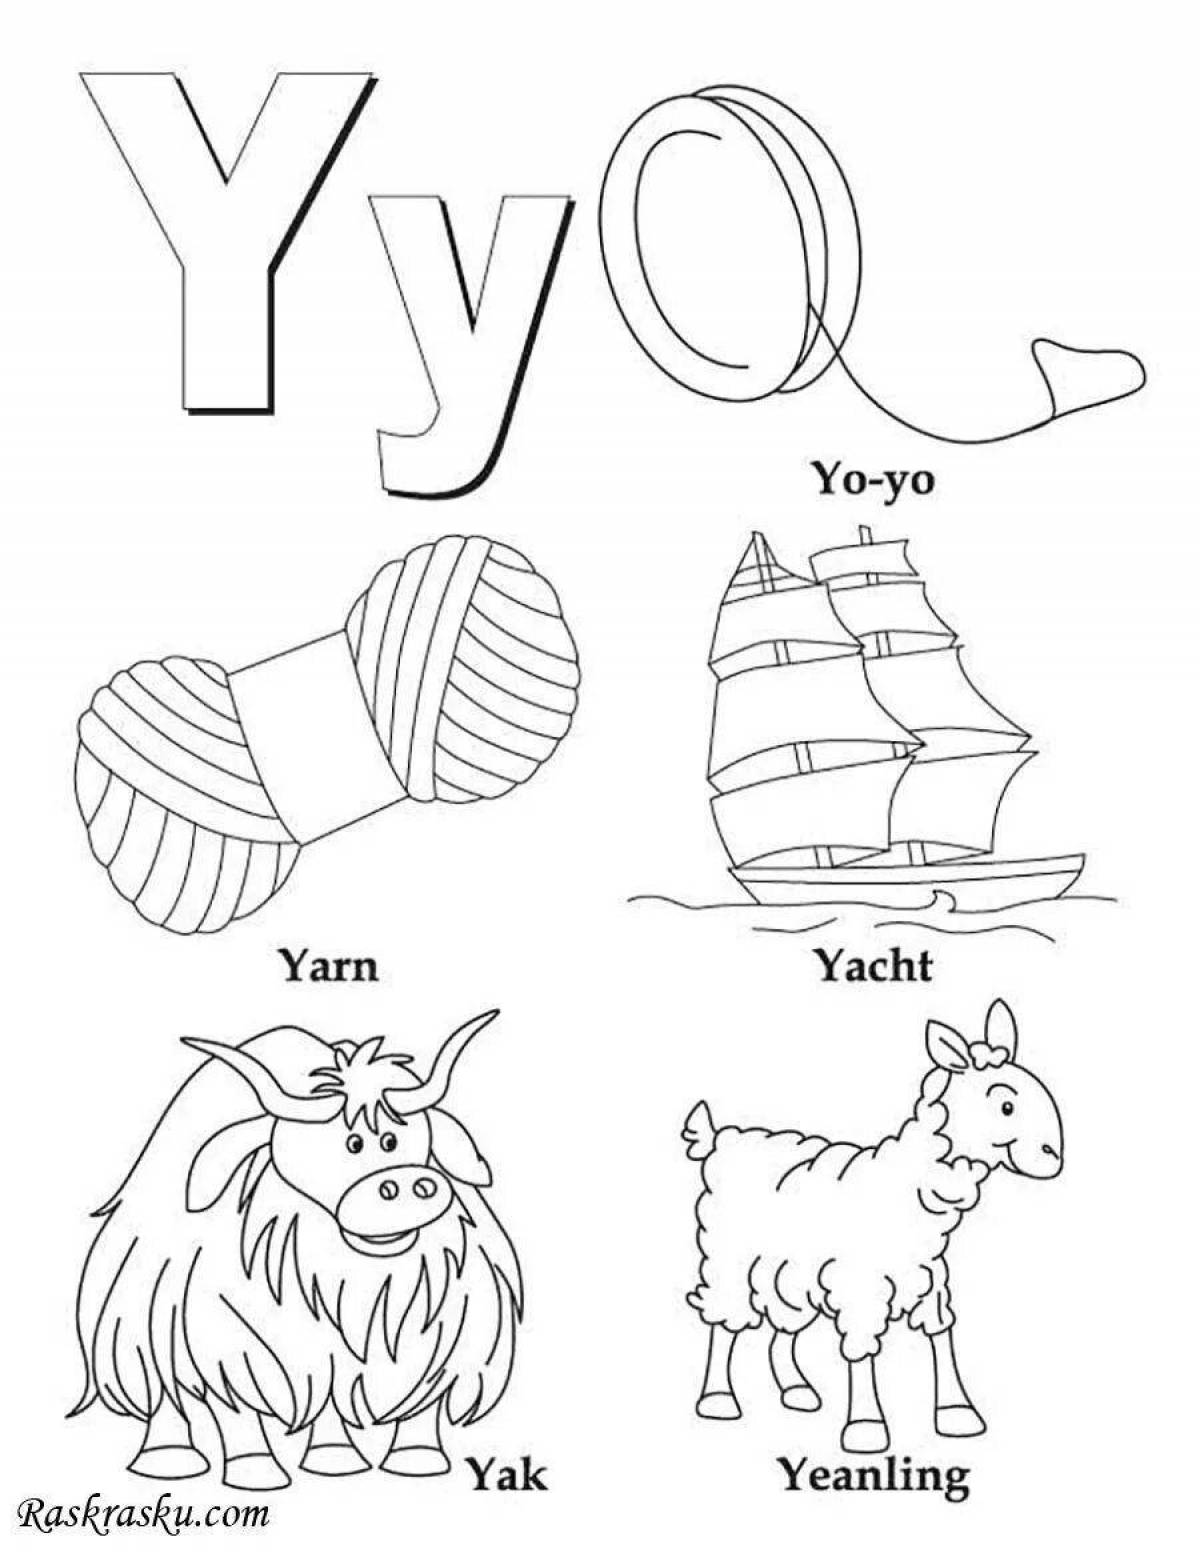 A fun coloring book of English letters for kids